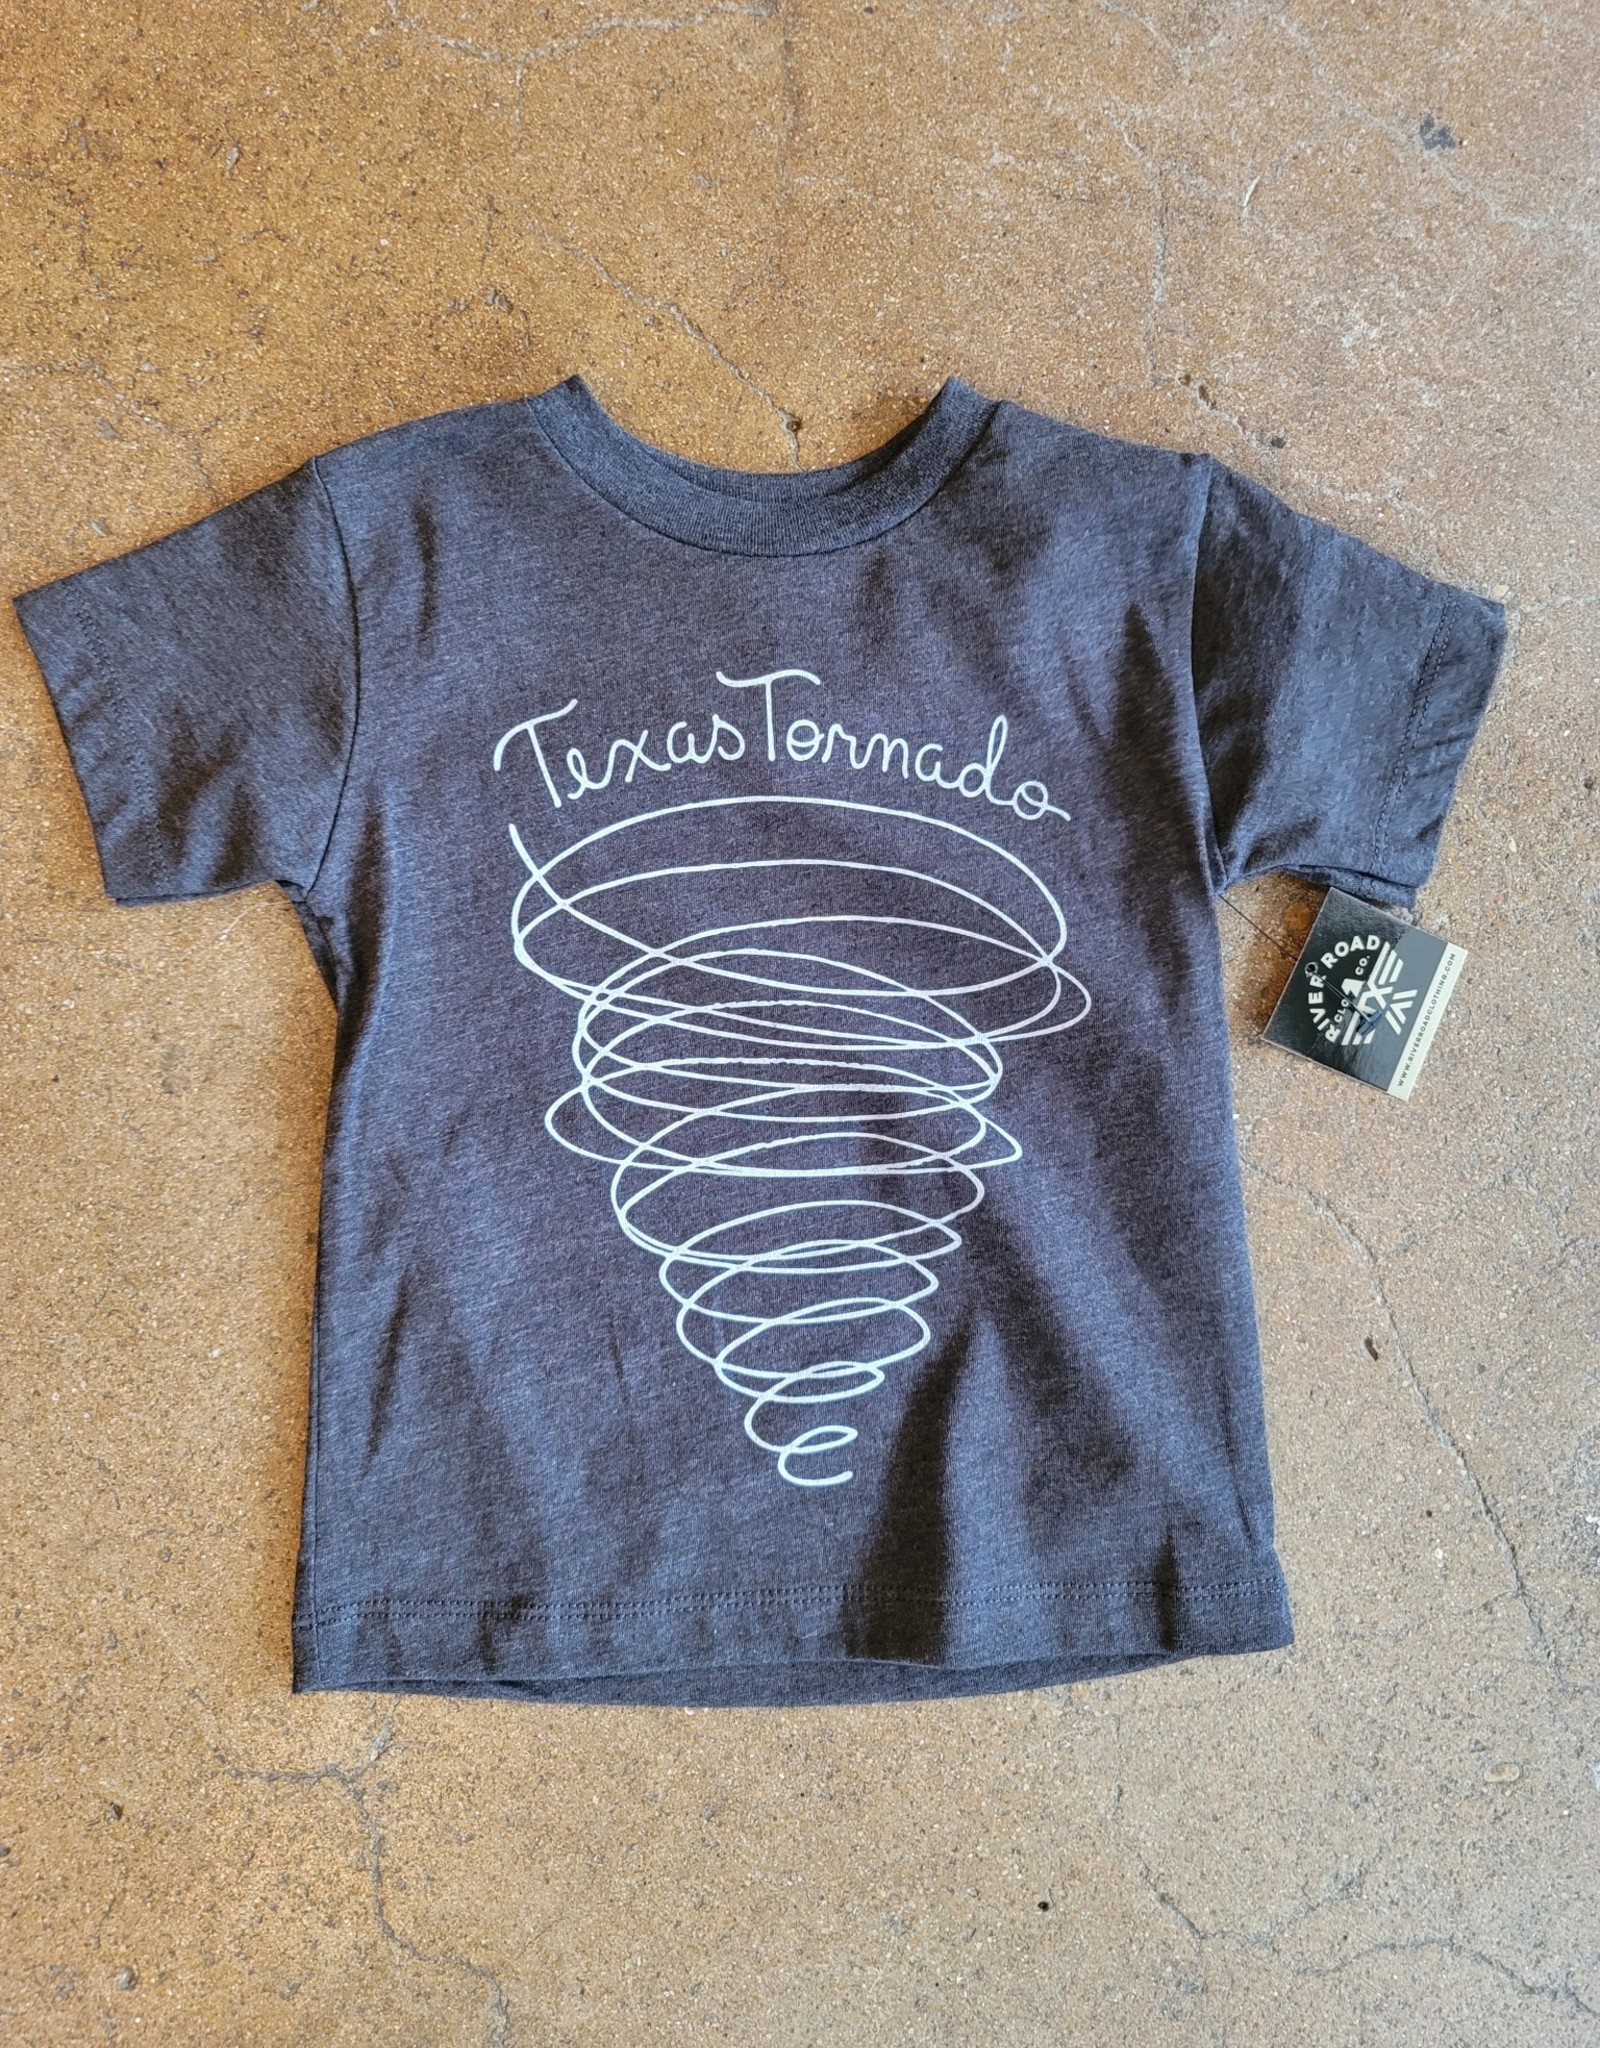 Texas Tornado Youth Tee by River Road Clothing